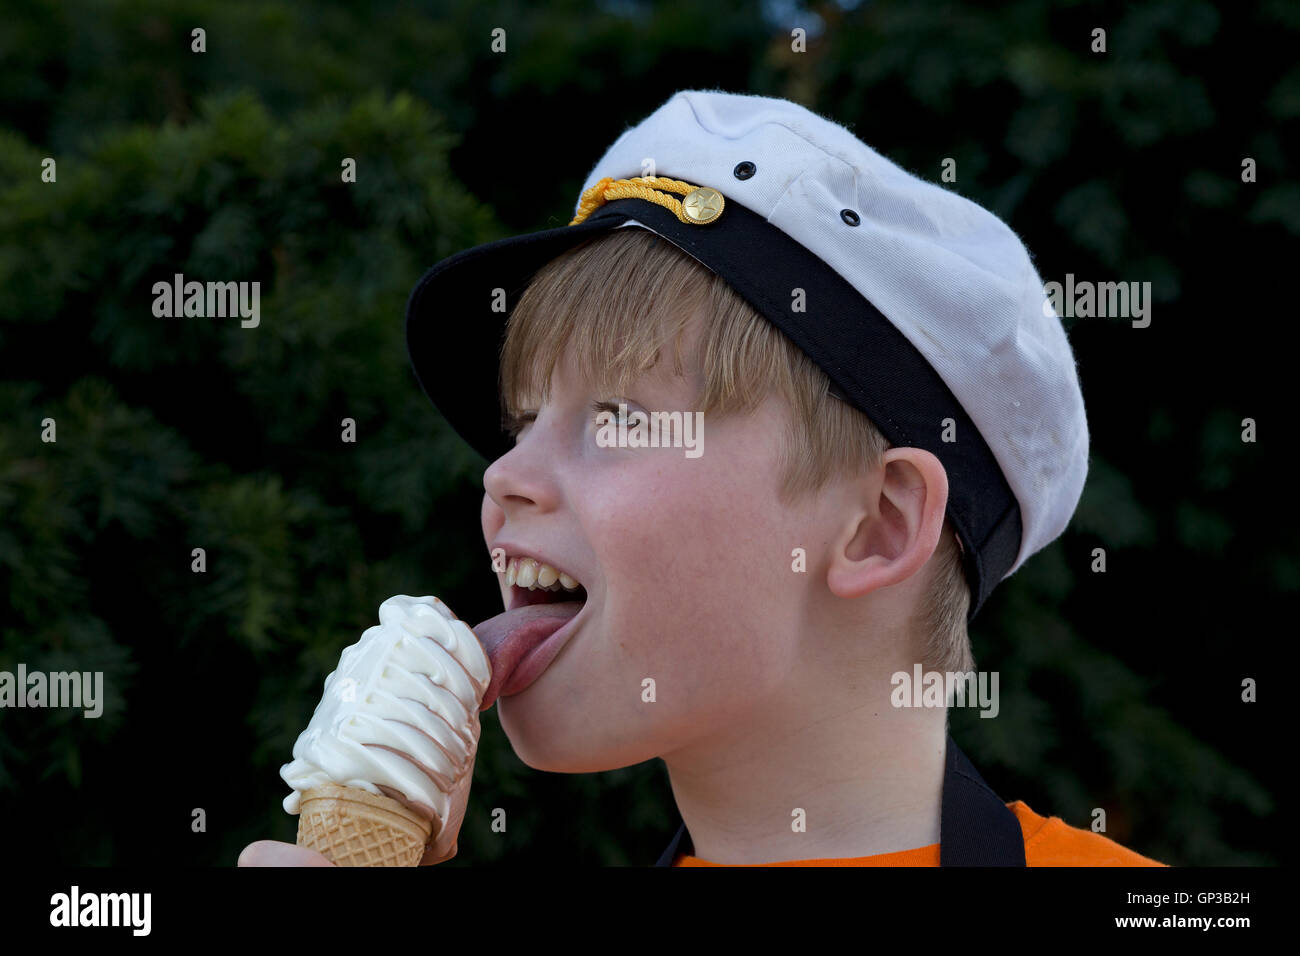 portrait of a young boy eating ice cream Stock Photo